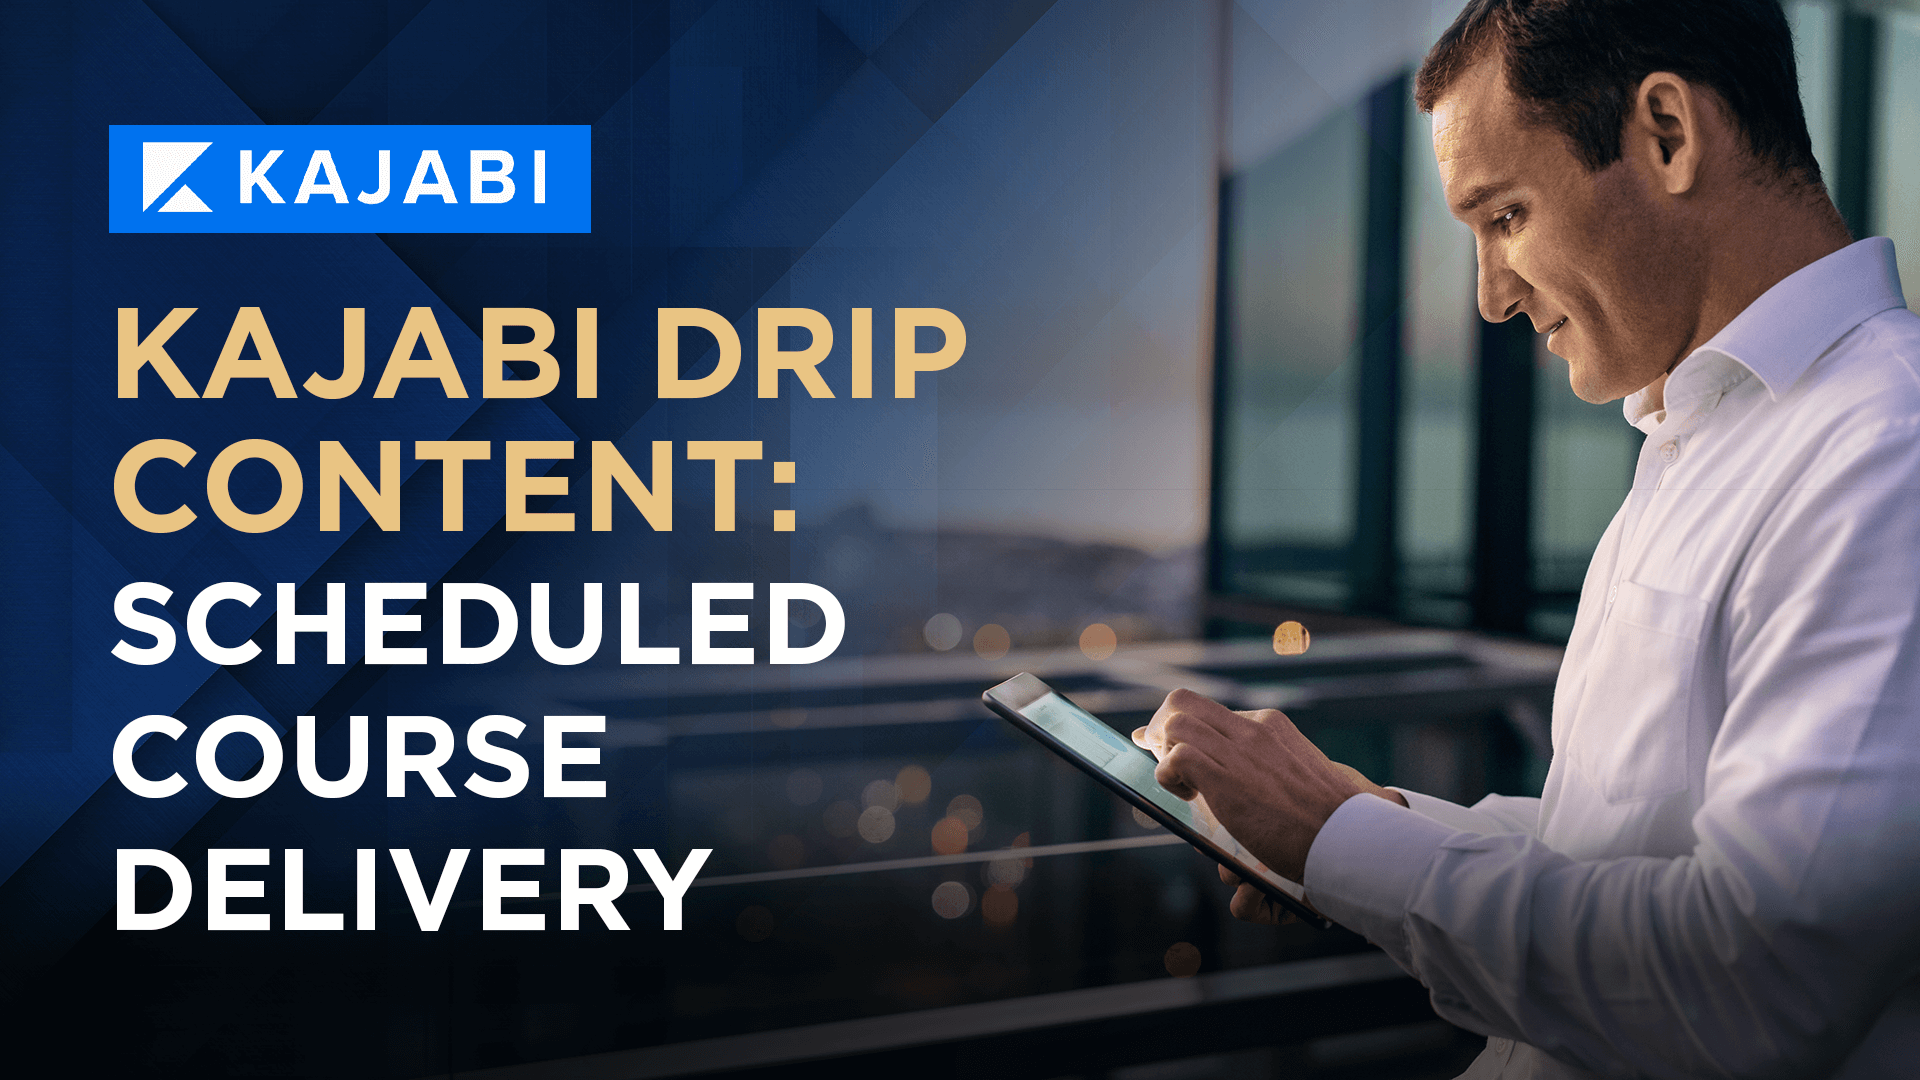 Kajabi Drip Content_ Scheduled Course Delivery